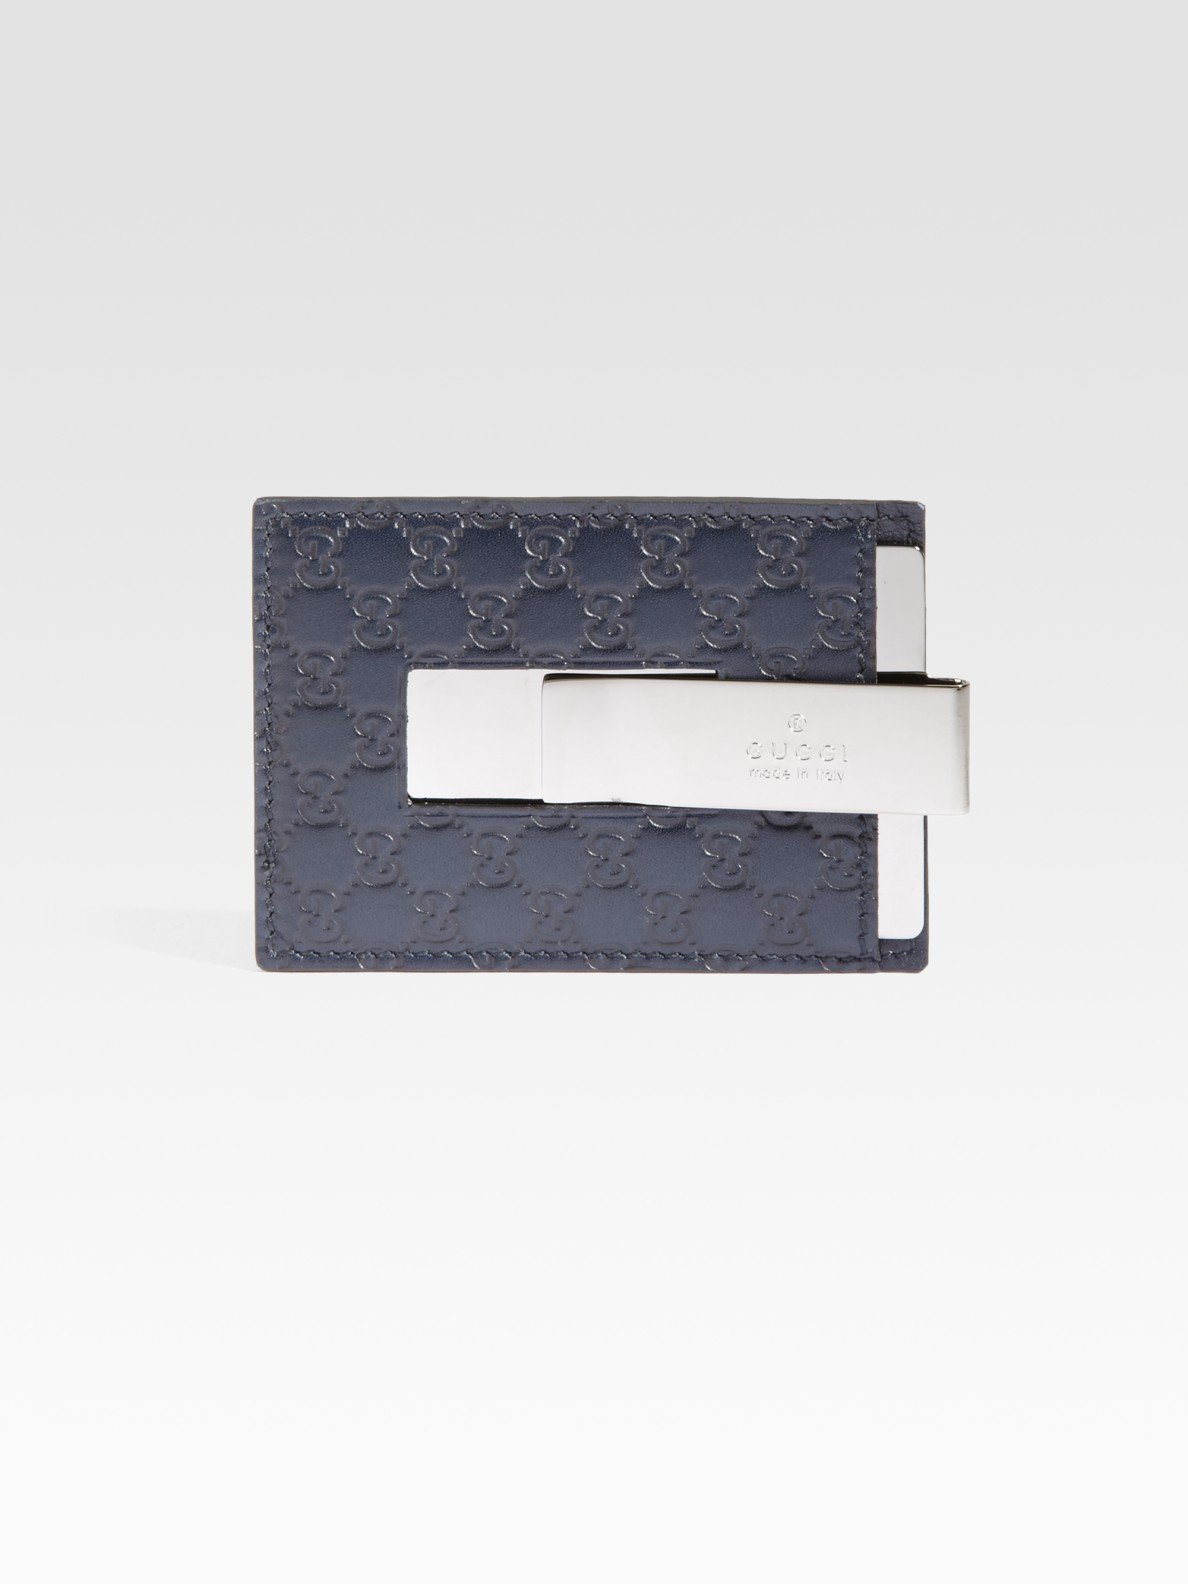 Gucci Microguccisima Card Money Clip Wallet in Blue for Men - Lyst